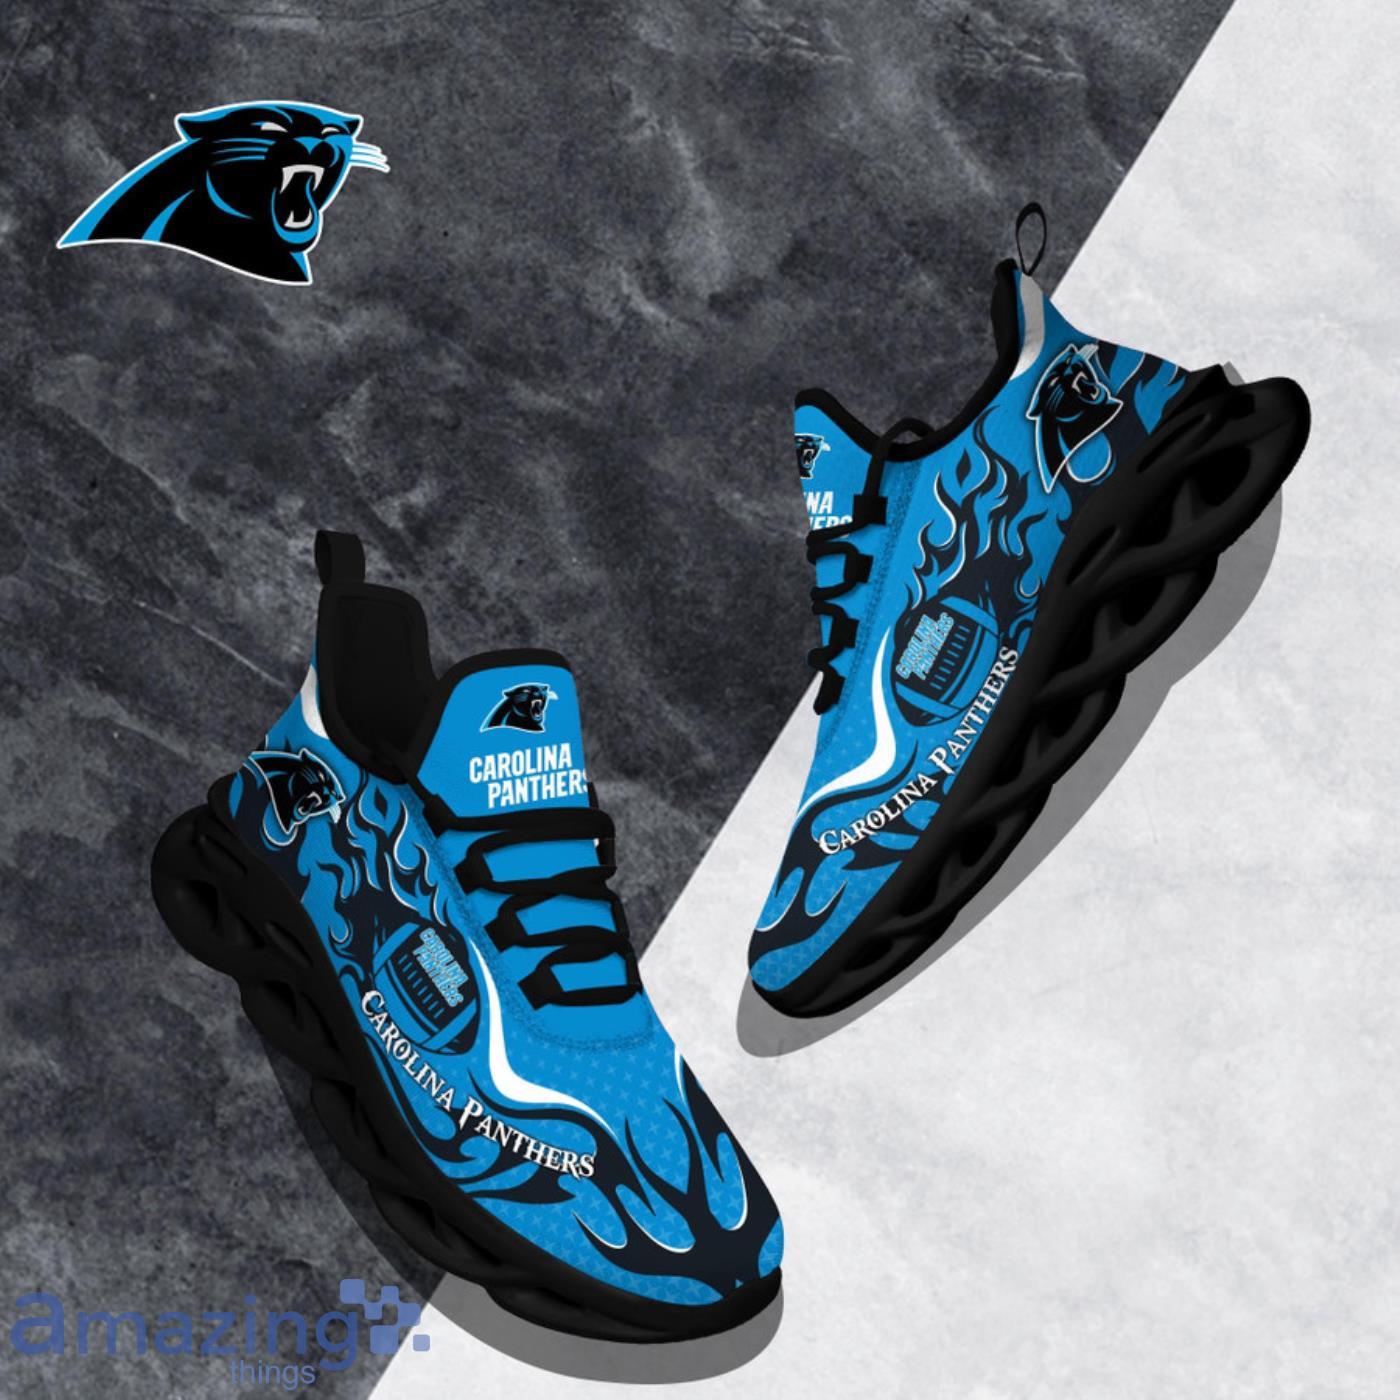 Carolina Panthers NFL Clunky Max Soul Shoes Product Photo 1